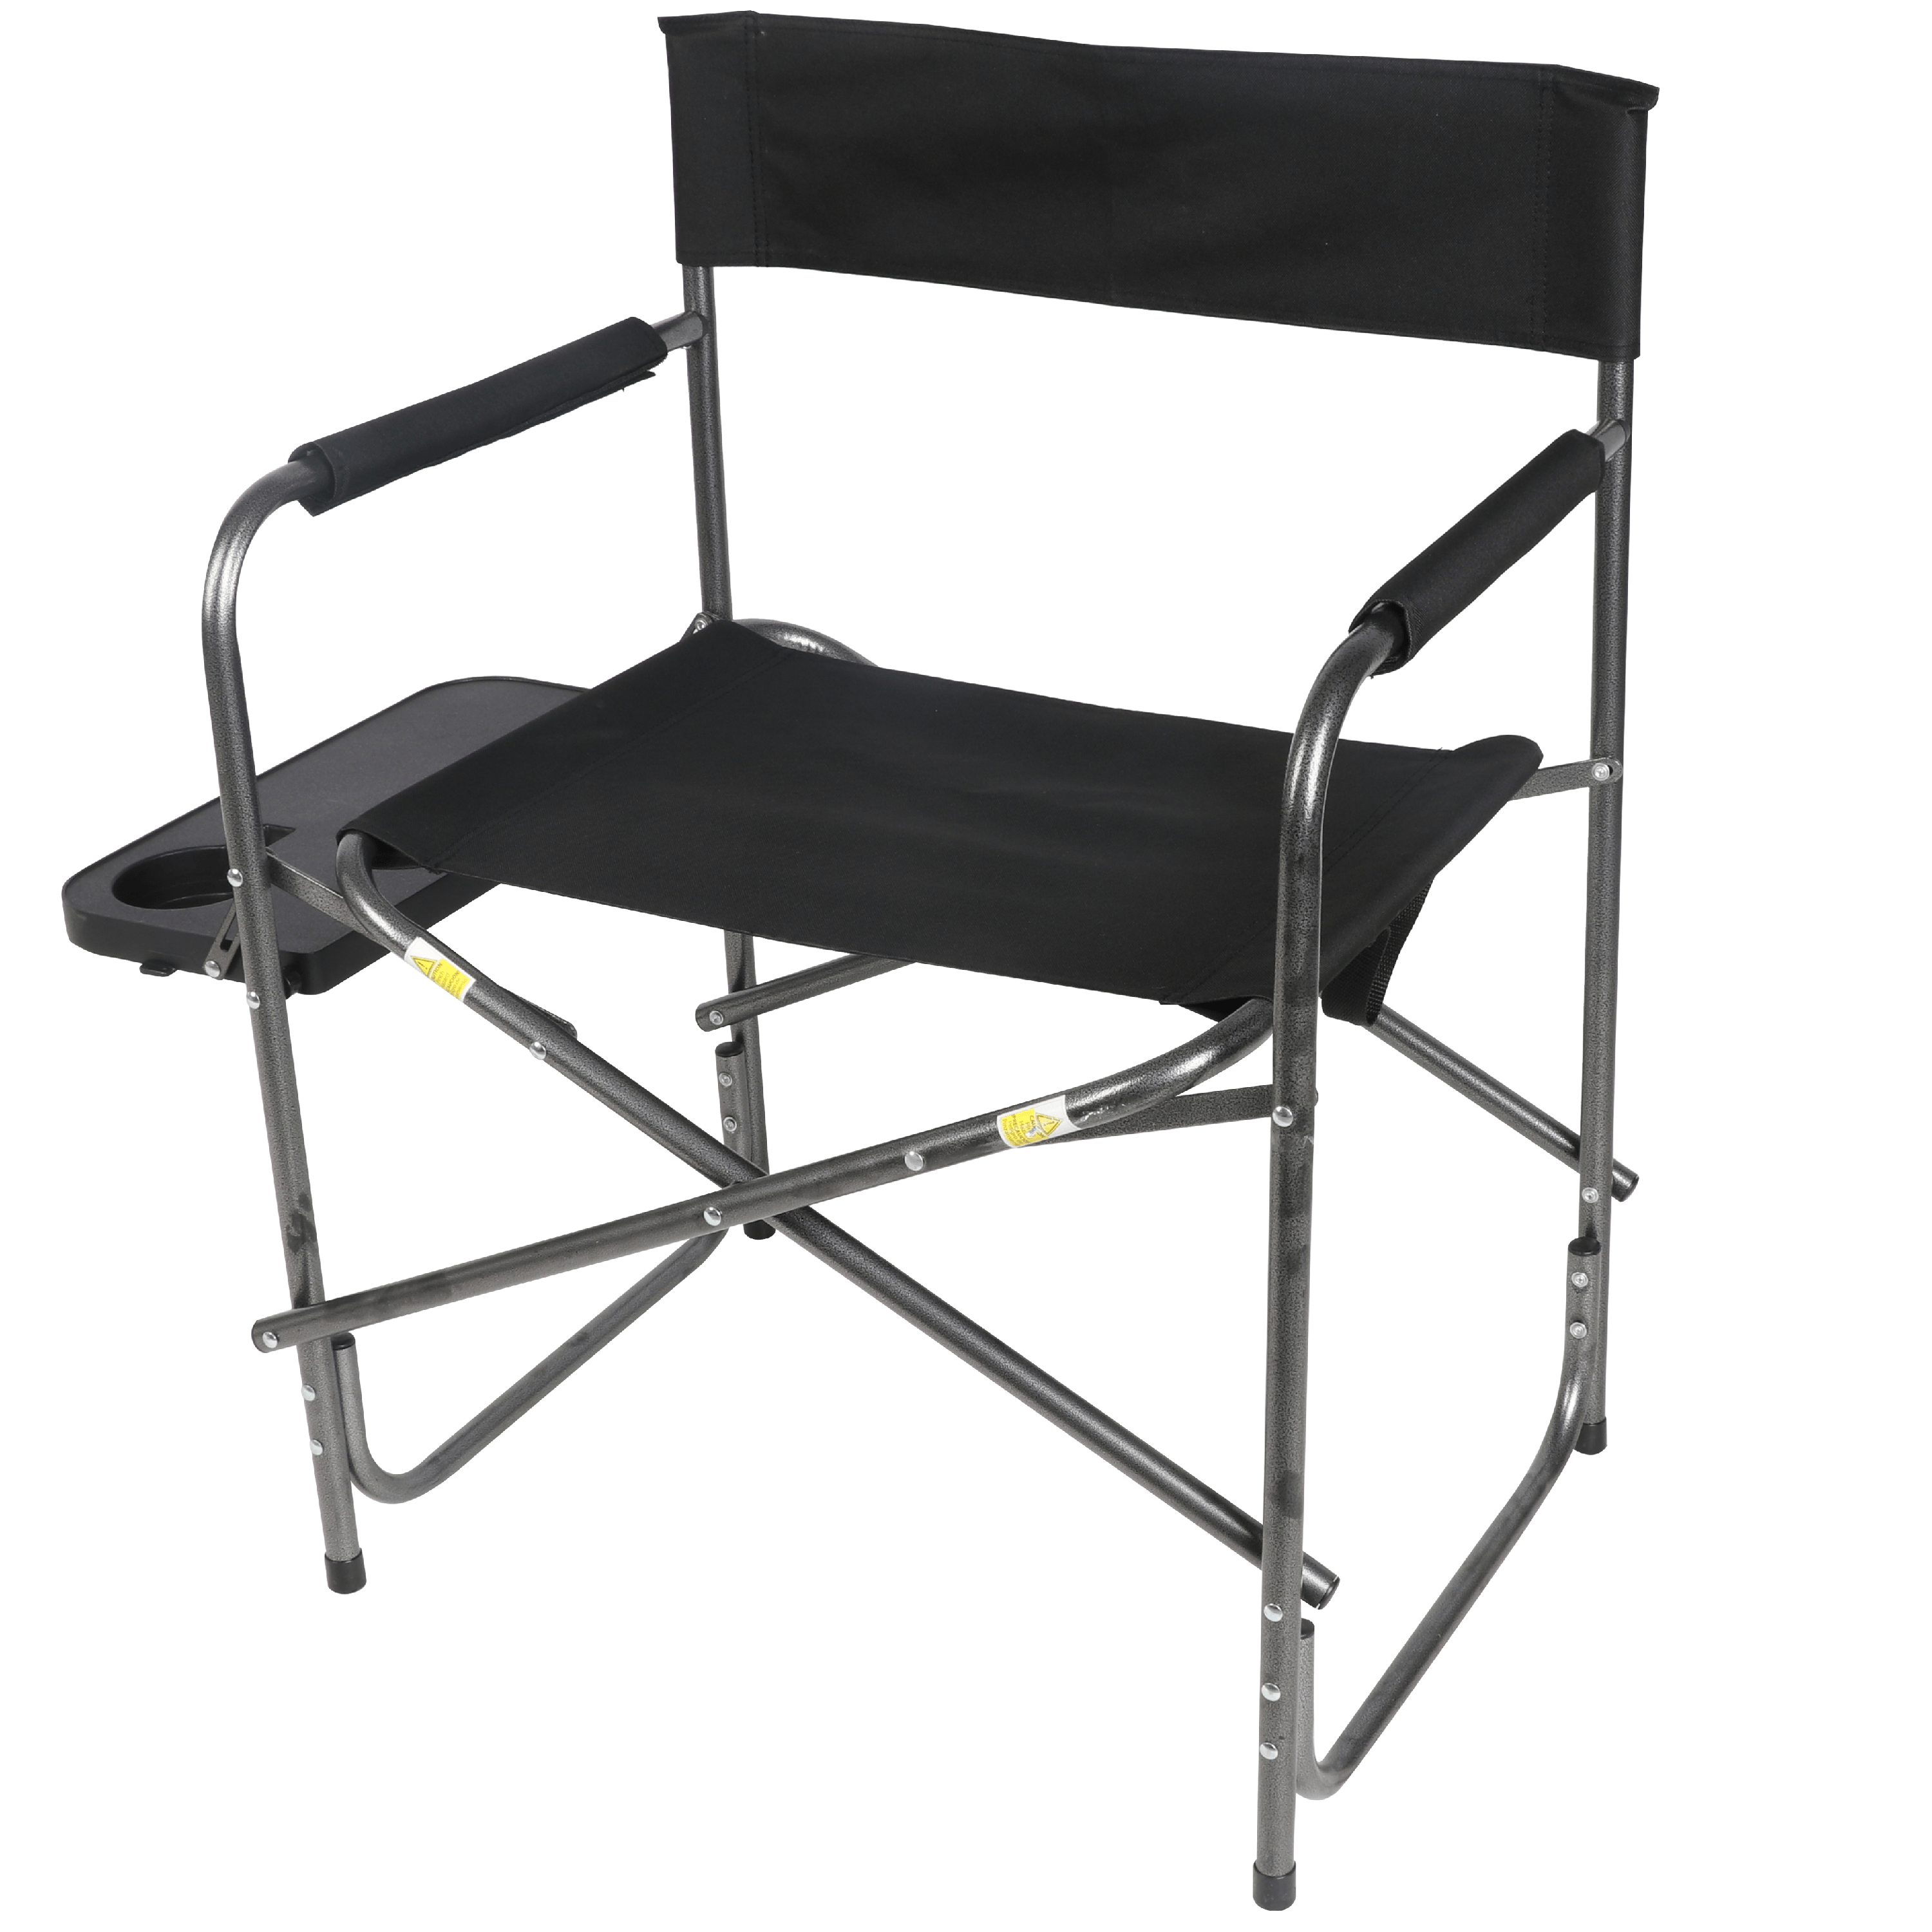 Ozark Trail Director’s Chair with Side Table, Adult, Black - image 1 of 11